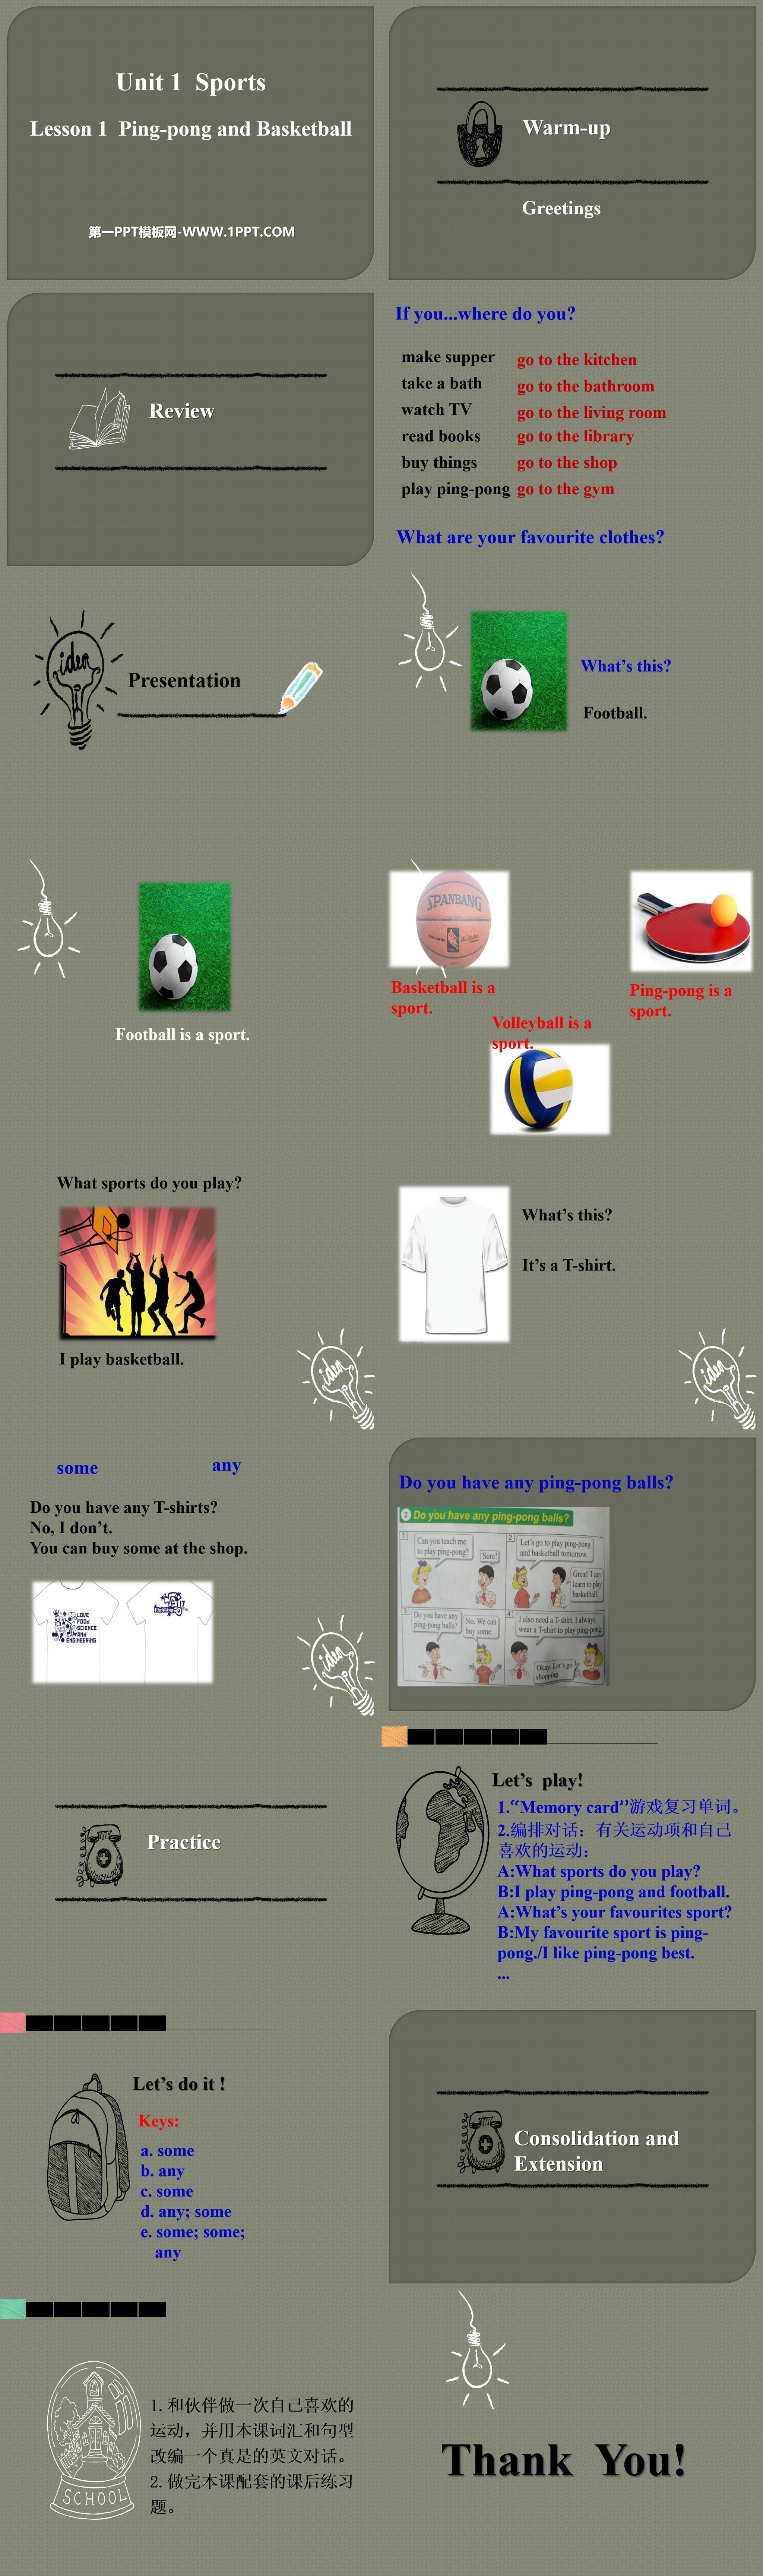 《Ping-pong and Basketball》Sports PPT
（2）